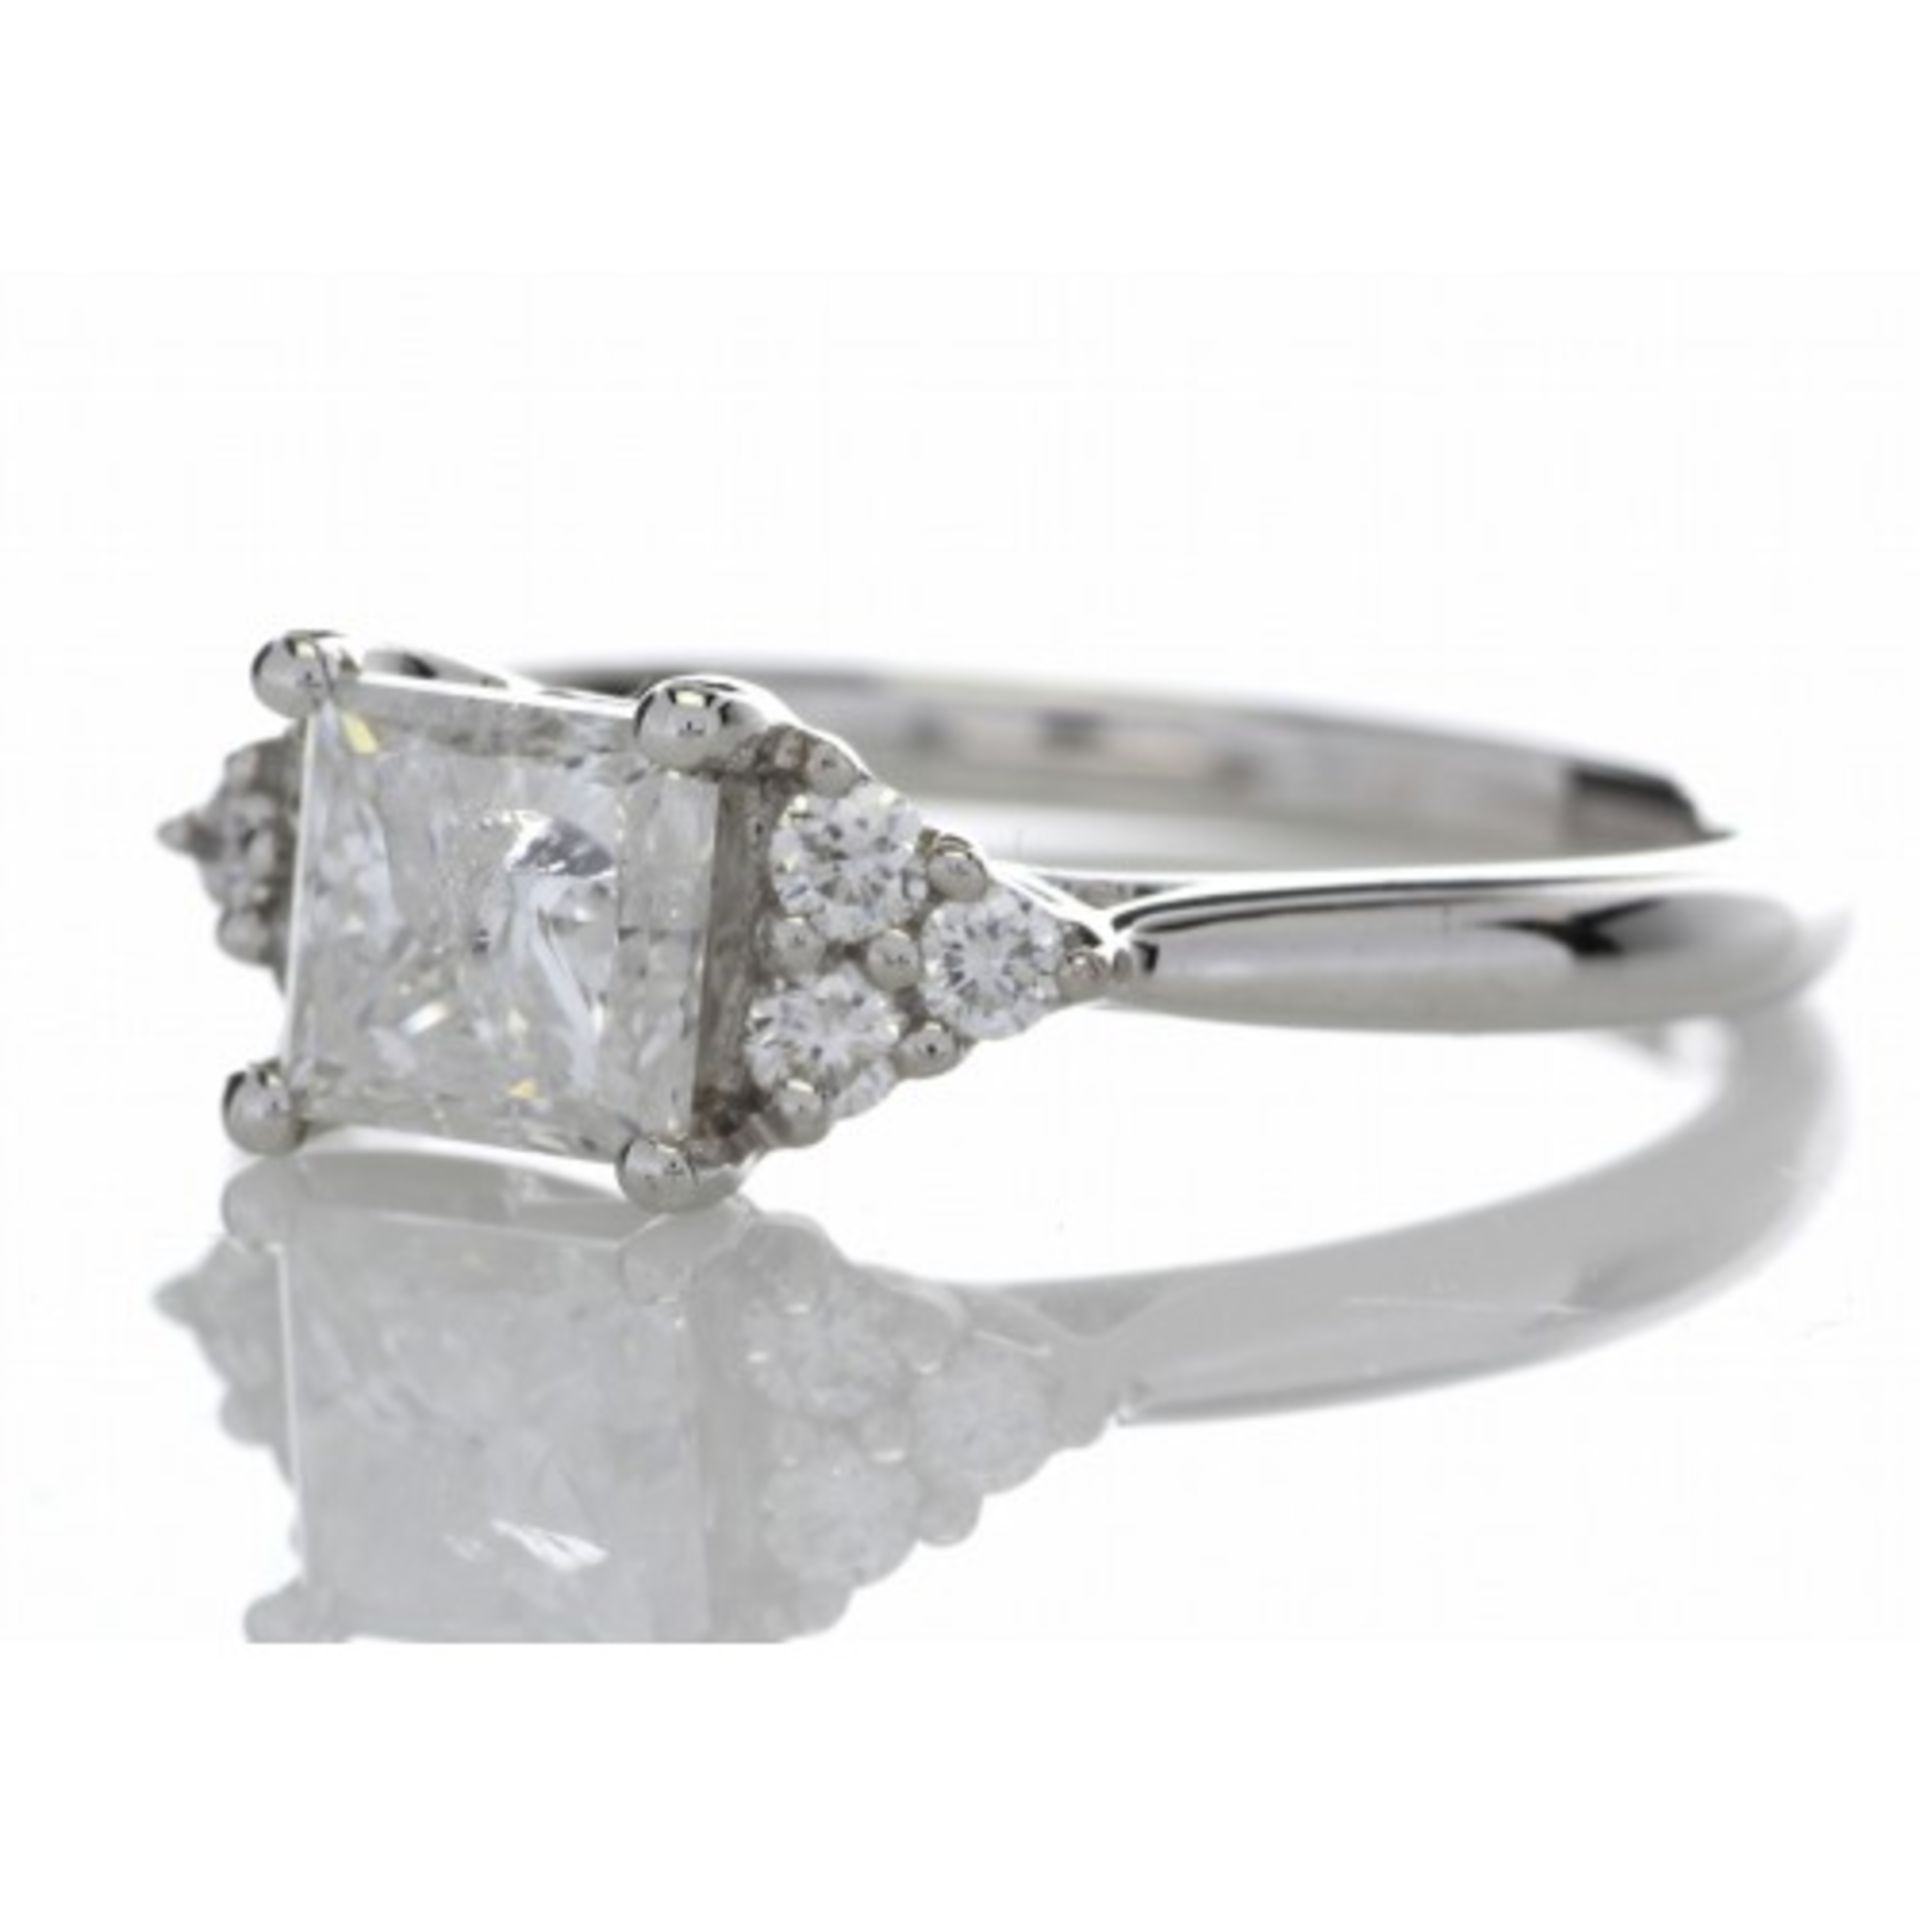 1.25ct diamond set ring set in 18ct gold. 1.06ct princess cut centre stone, D colour and I1 clarity. - Image 4 of 5